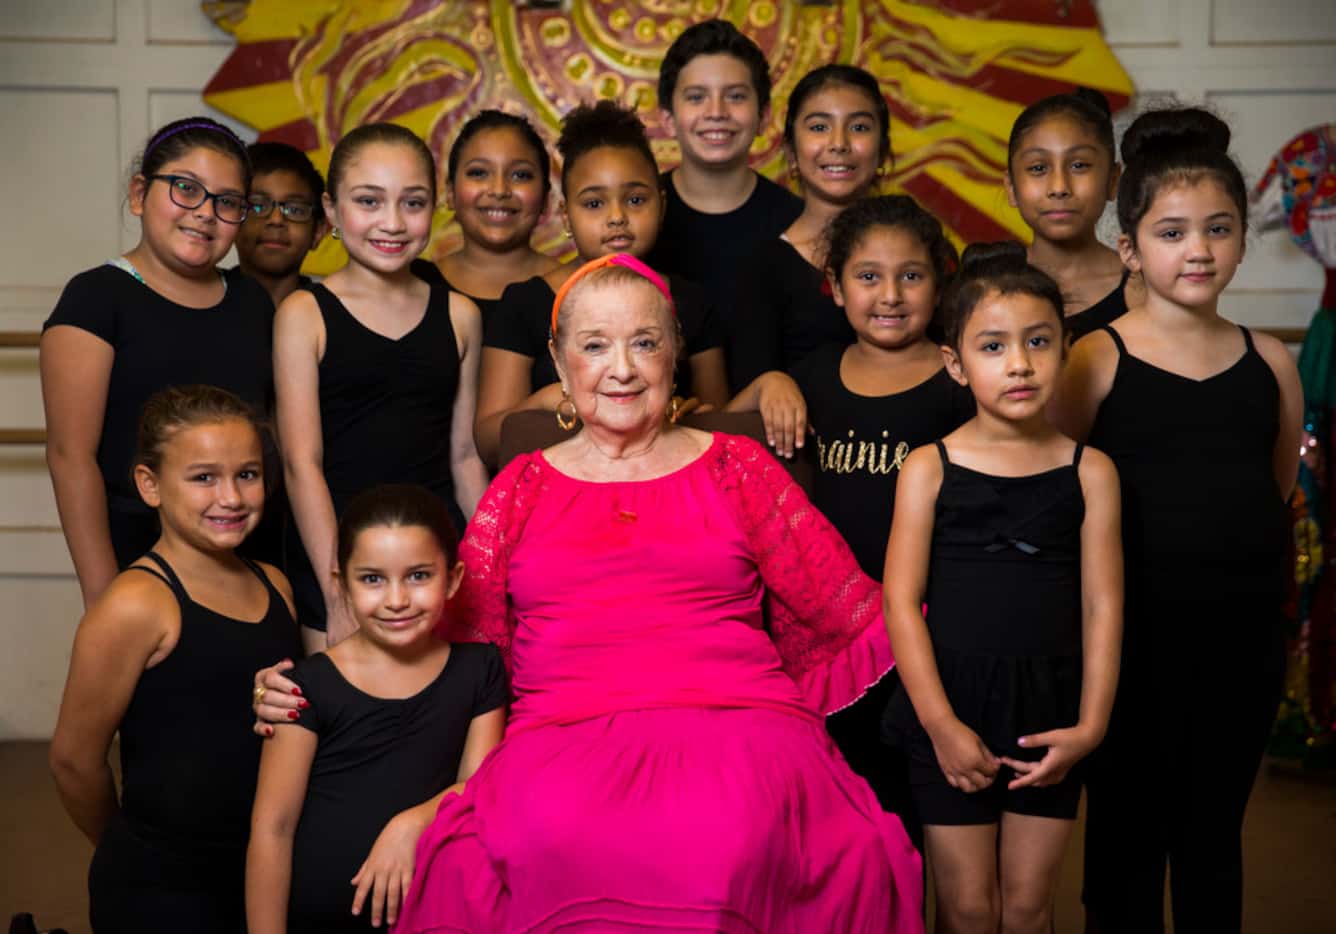 Anita N. Martinez poses for a photo with students at her ballet folklorico studio on Aug....